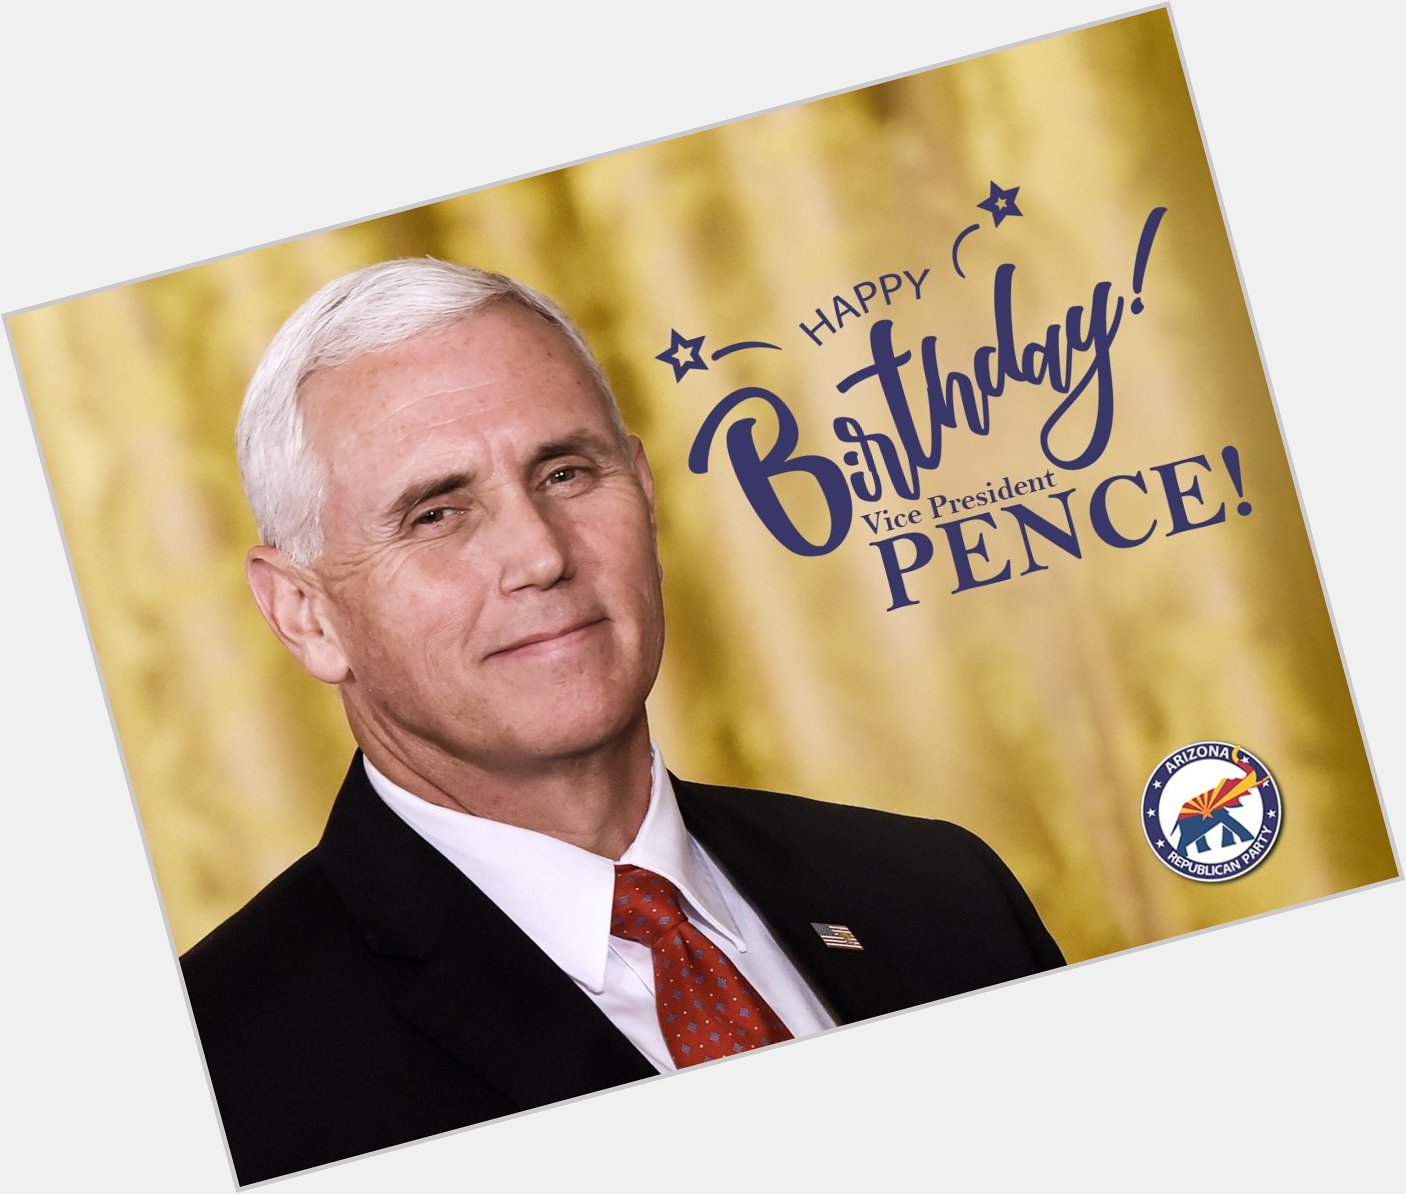 Happy birthday, Mike Pence! Thank you for fighting for our shared conservative principles each and every day! 